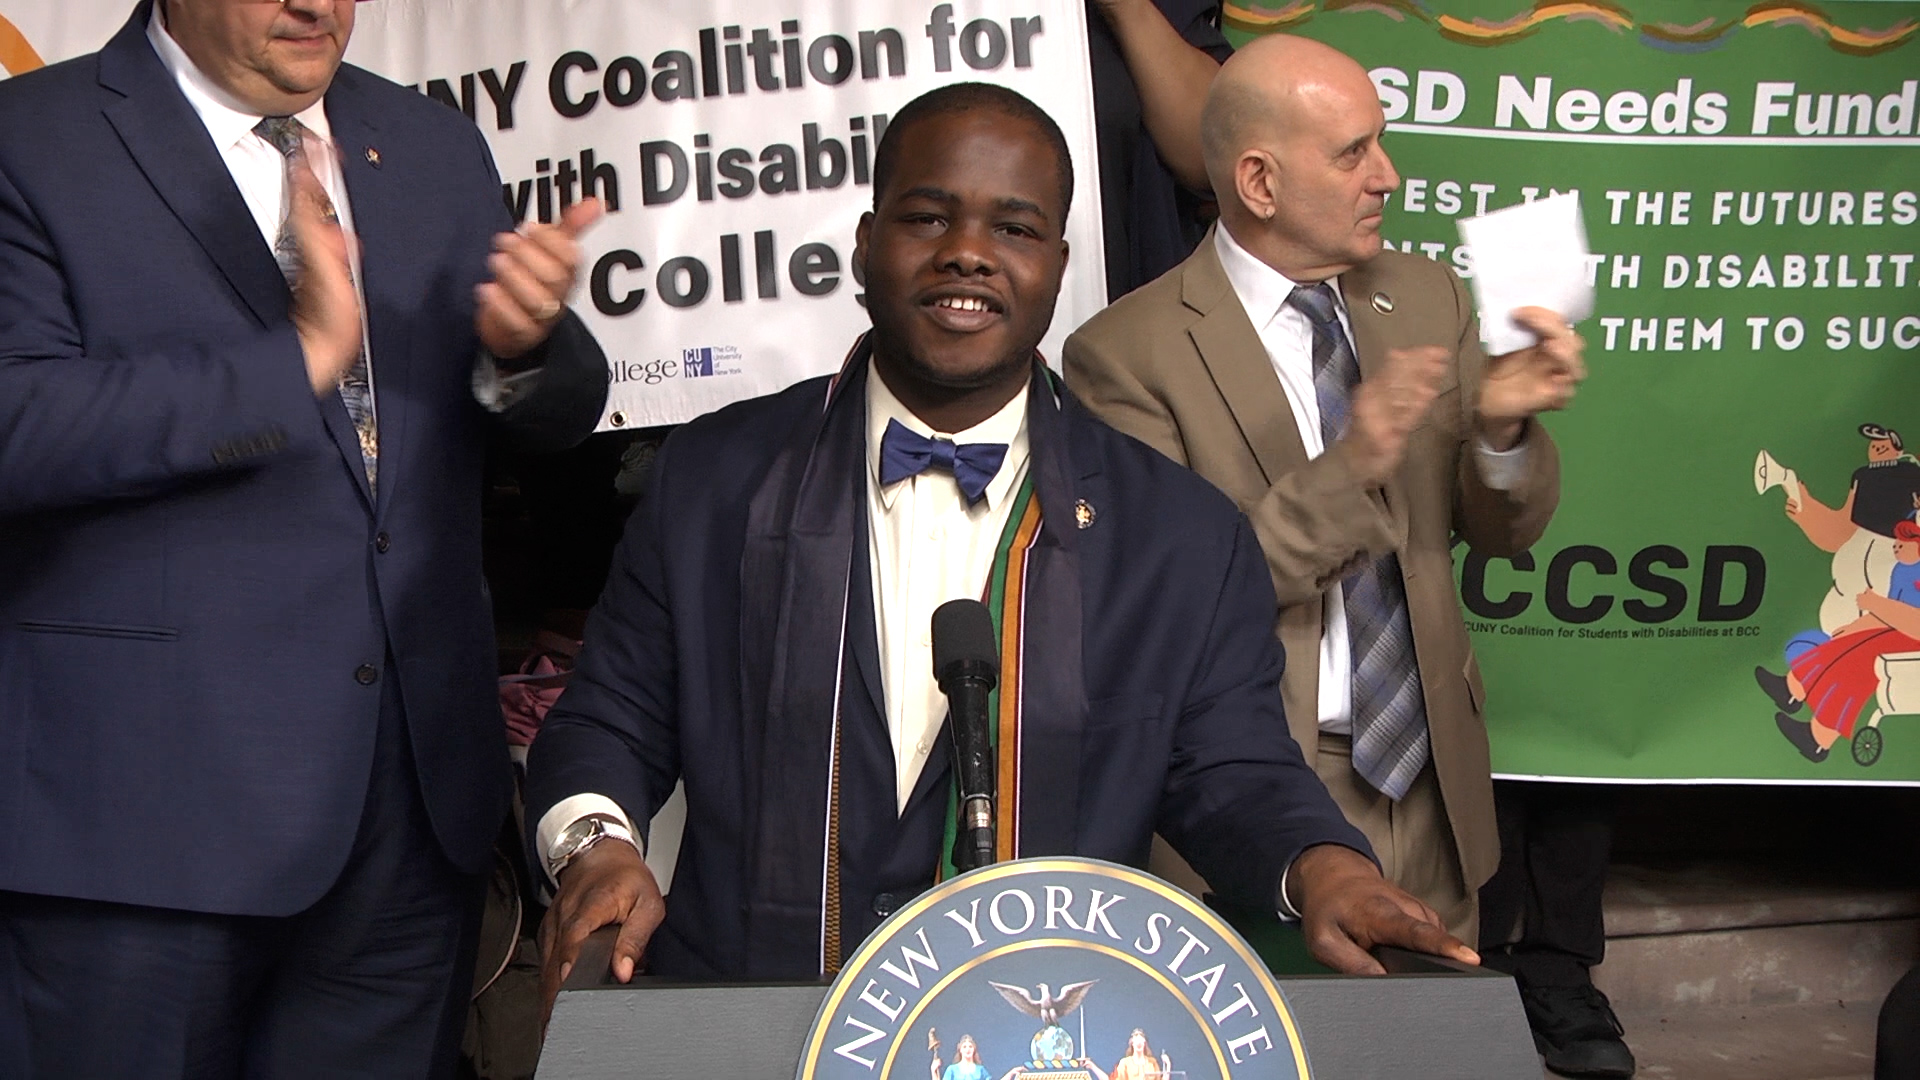 Albany Rally to Advocate for Students with Disabilities